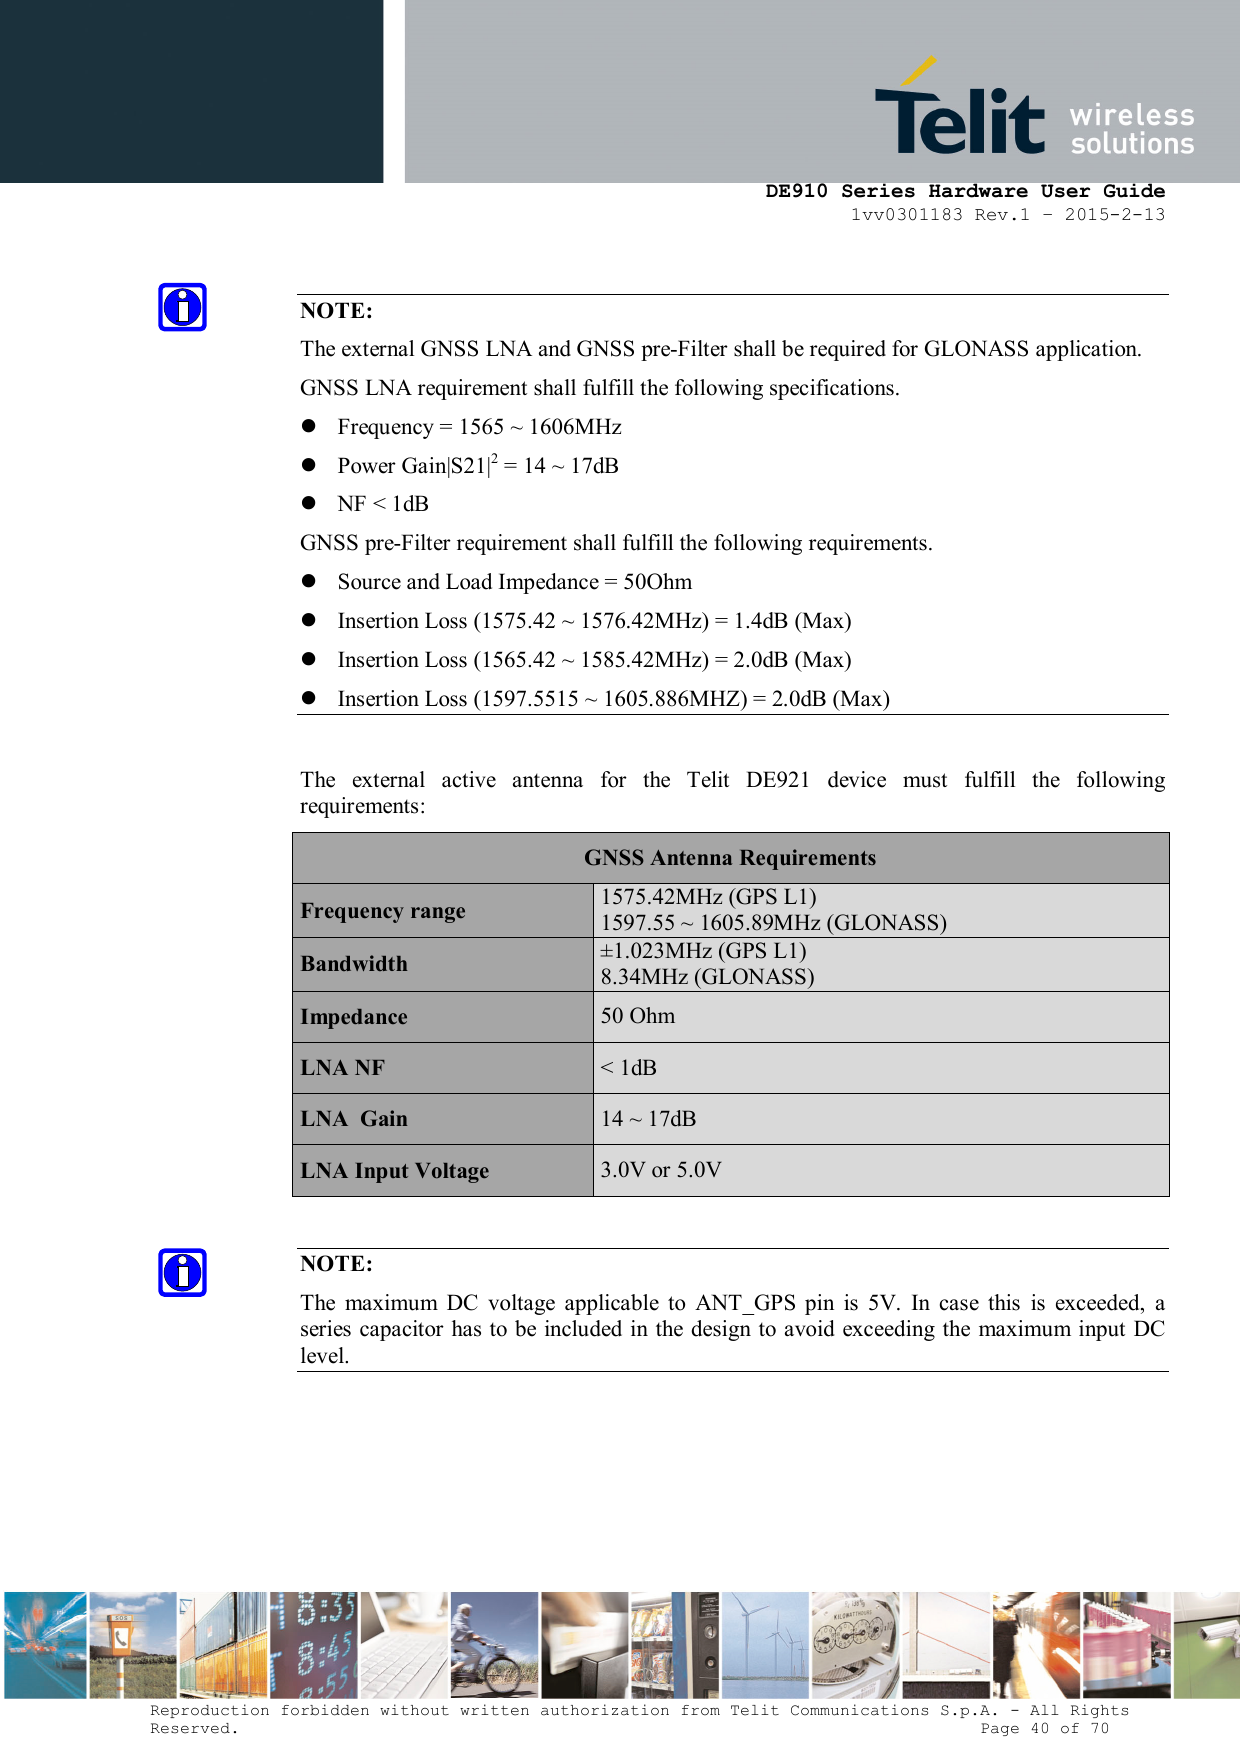      DE910 Series Hardware User Guide 1vv0301183 Rev.1 – 2015-2-13 Reproduction forbidden without written authorization from Telit Communications S.p.A. - All Rights Reserved.                                                                          Page 40 of 70  NOTE: The external GNSS LNA and GNSS pre-Filter shall be required for GLONASS application. GNSS LNA requirement shall fulfill the following specifications.  Frequency = 1565 ~ 1606MHz  Power Gain|S21|2 = 14 ~ 17dB  NF &lt; 1dB GNSS pre-Filter requirement shall fulfill the following requirements.  Source and Load Impedance = 50Ohm  Insertion Loss (1575.42 ~ 1576.42MHz) = 1.4dB (Max)  Insertion Loss (1565.42 ~ 1585.42MHz) = 2.0dB (Max)  Insertion Loss (1597.5515 ~ 1605.886MHZ) = 2.0dB (Max)  The  external  active  antenna  for  the  Telit  DE921  device  must  fulfill  the  following requirements: GNSS Antenna Requirements Frequency range 1575.42MHz (GPS L1) 1597.55 ~ 1605.89MHz (GLONASS) Bandwidth ±1.023MHz (GPS L1) 8.34MHz (GLONASS) Impedance  50 Ohm LNA NF  &lt; 1dB LNA  Gain  14 ~ 17dB LNA Input Voltage  3.0V or 5.0V  NOTE: The  maximum  DC  voltage  applicable  to  ANT_GPS  pin  is  5V.  In  case  this  is  exceeded,  a series capacitor has to be  included  in the design to avoid exceeding the maximum input DC level.      